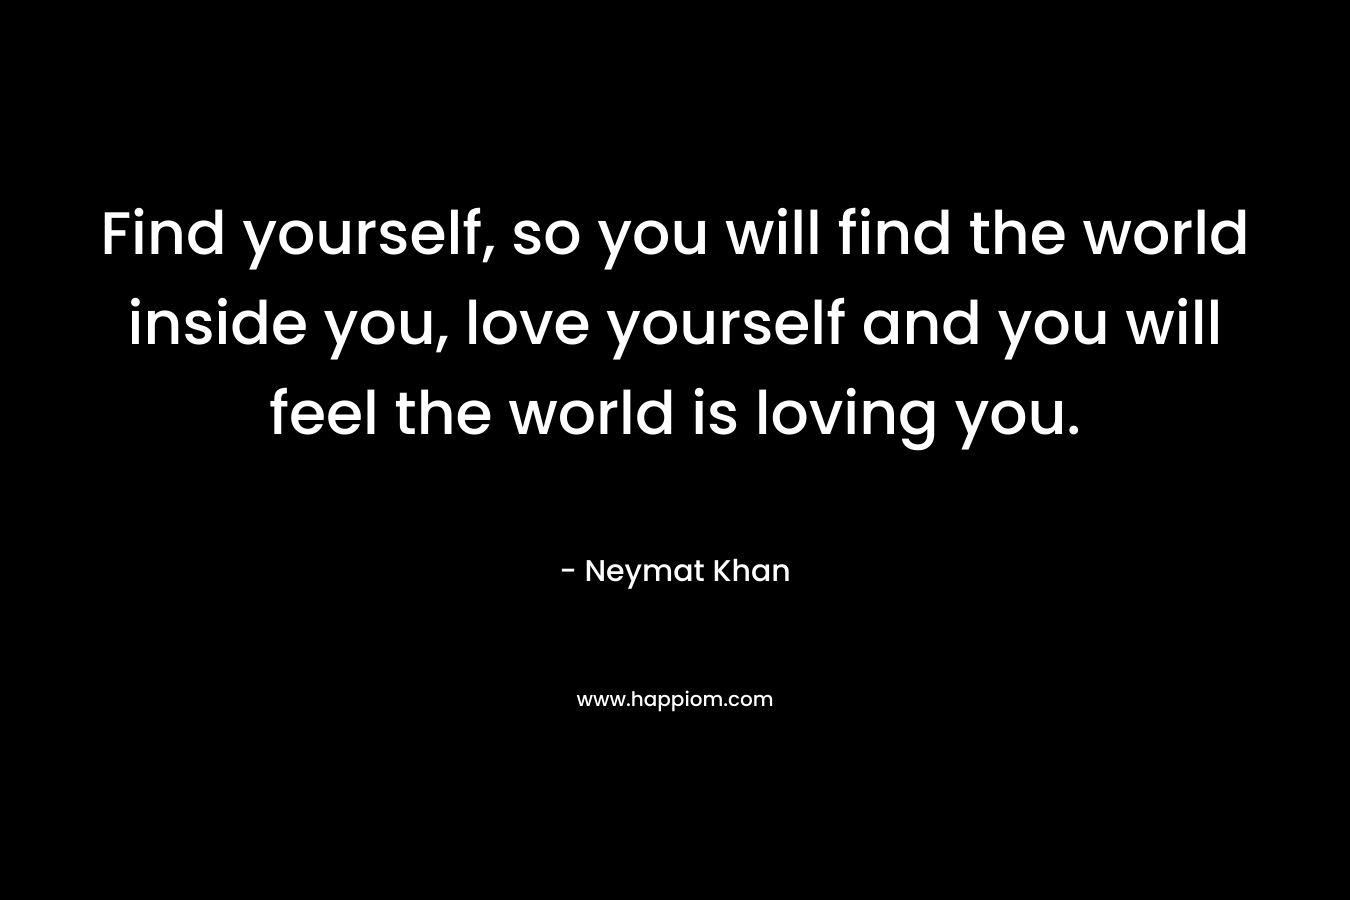 Find yourself, so you will find the world inside you, love yourself and you will feel the world is loving you. – Neymat Khan